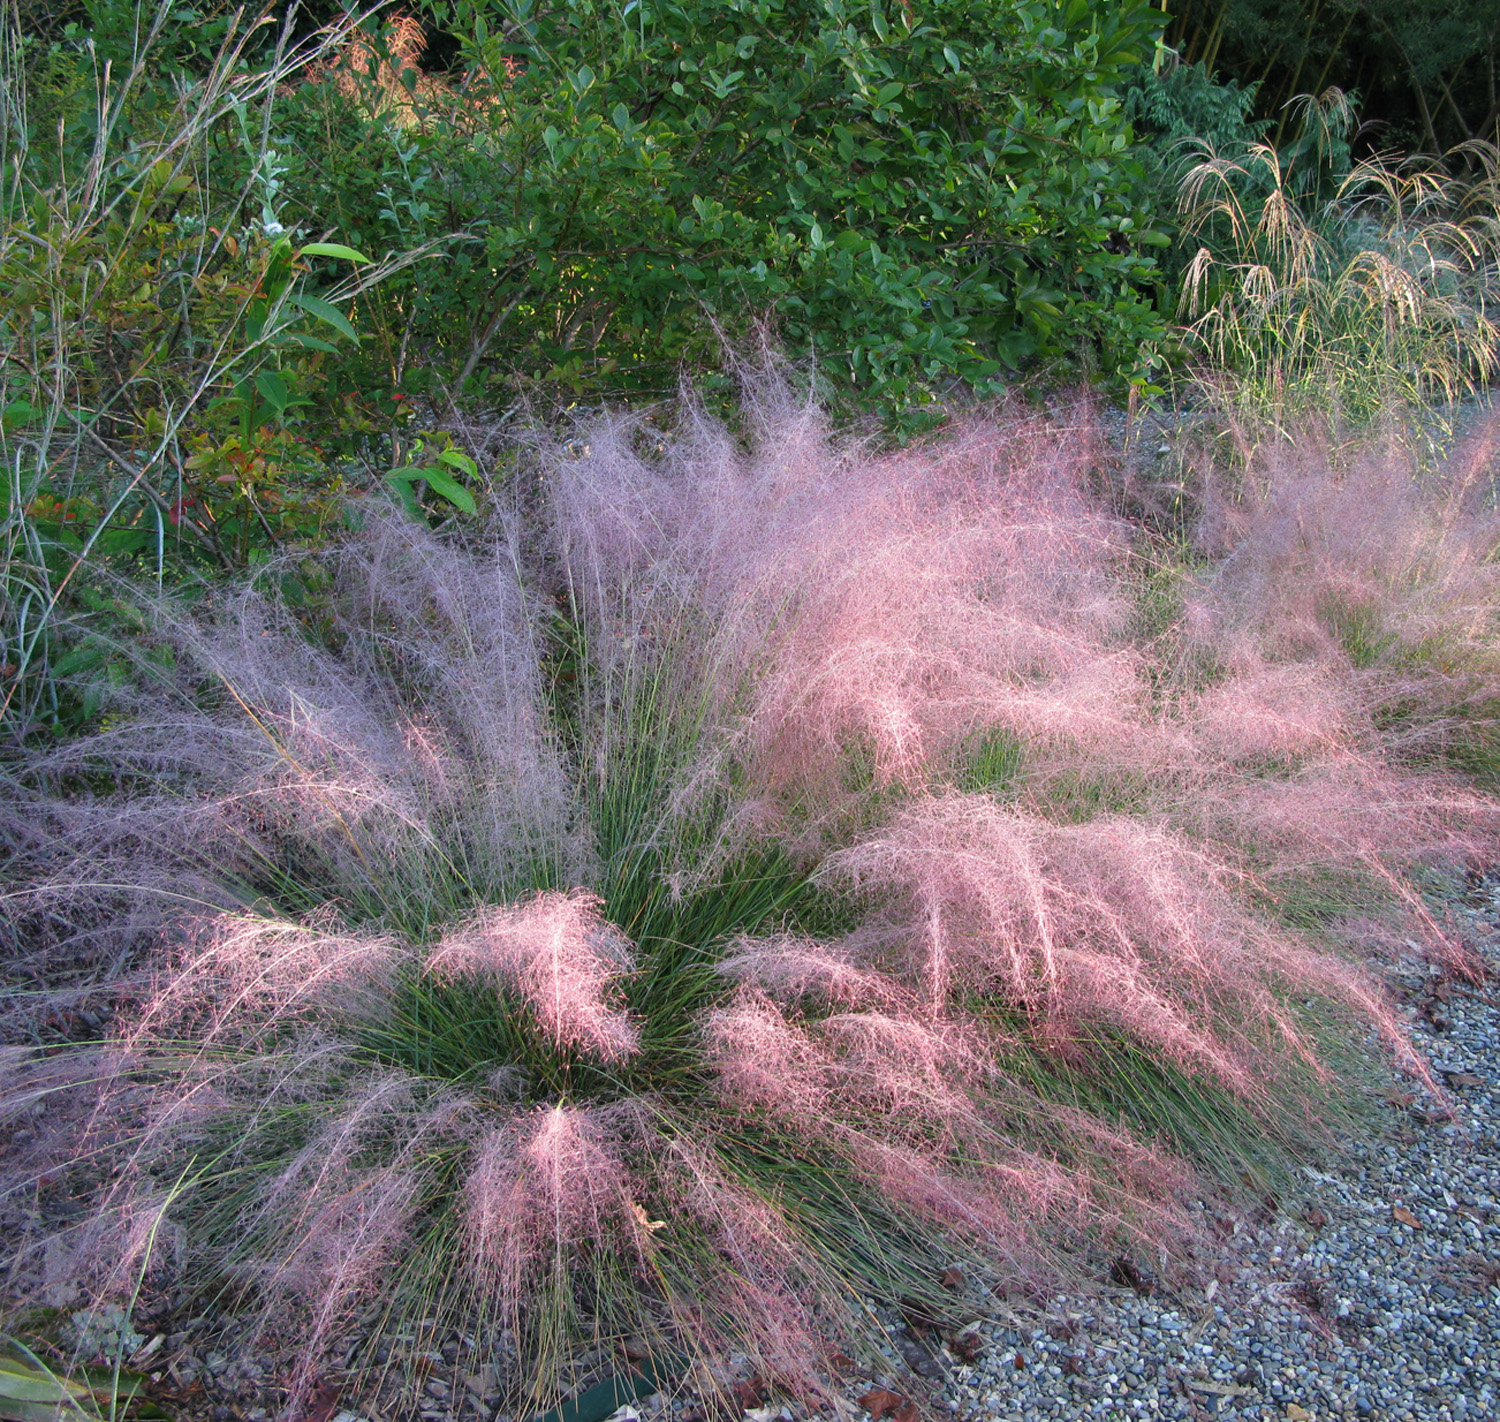 dig deeper into muhly grasses, the genus muhlenbergia.